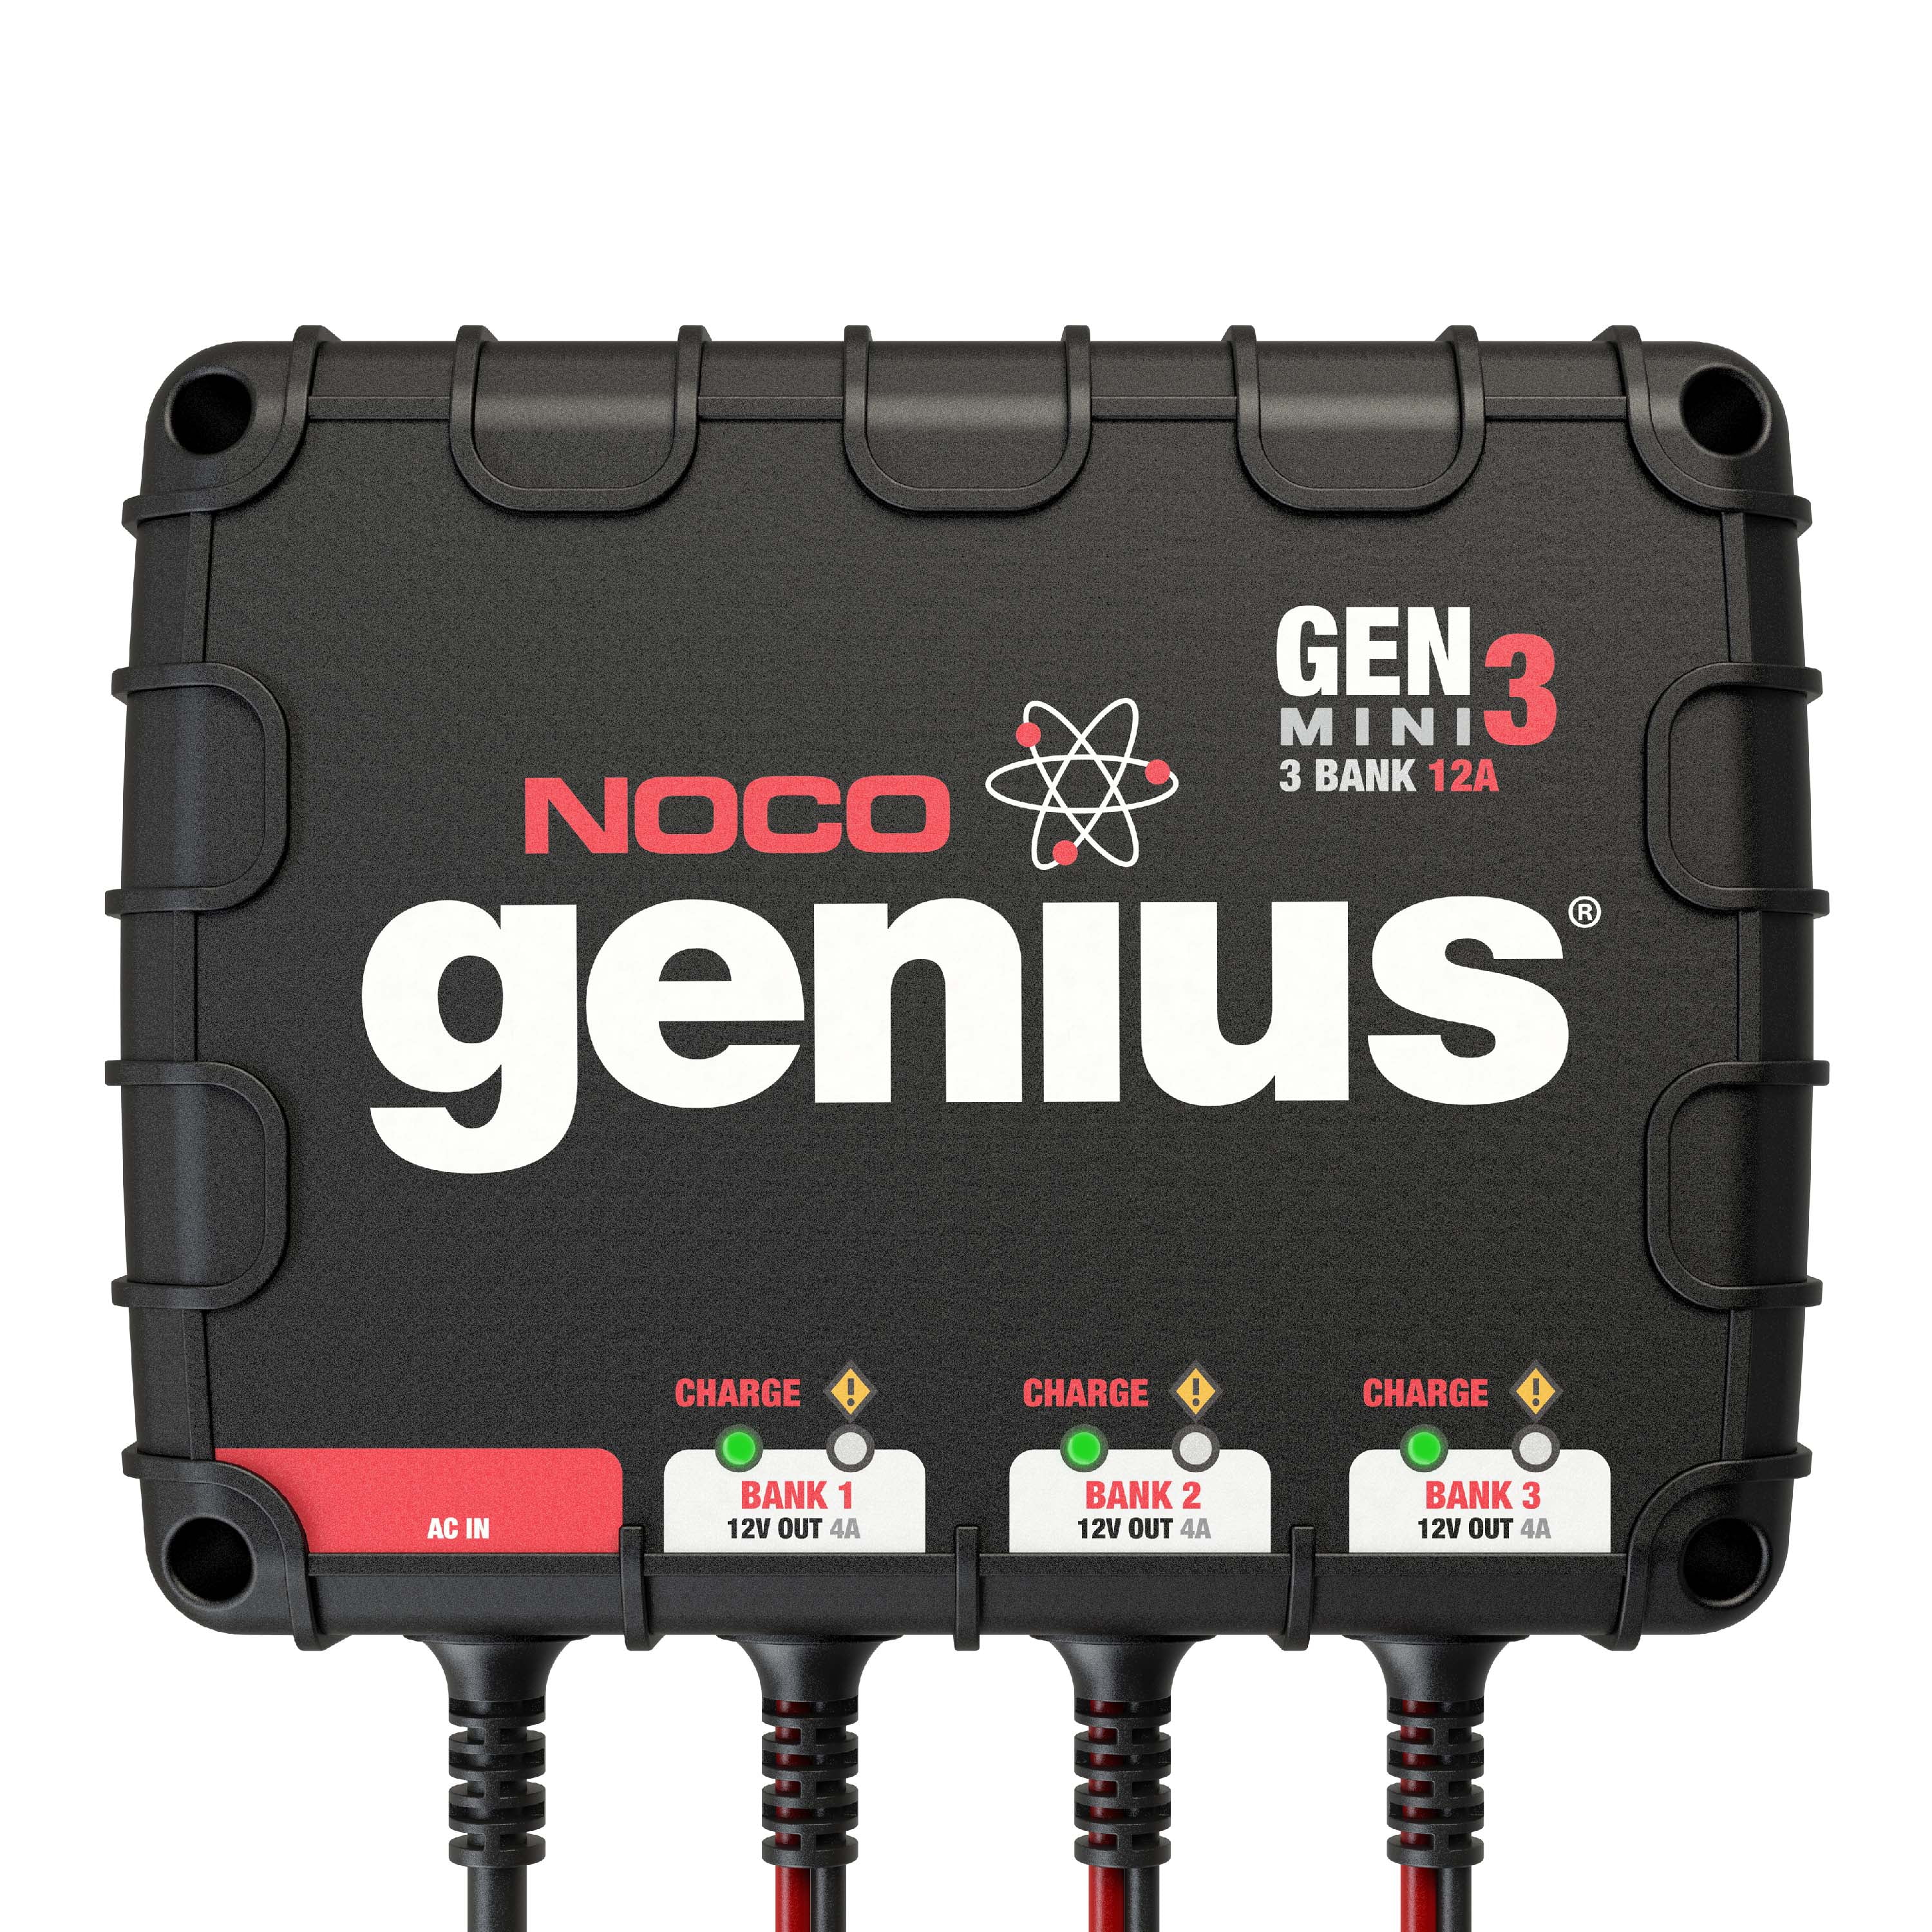 NOCO Genius GENM3 12 Amp 3-Bank On-Board Battery Charger 